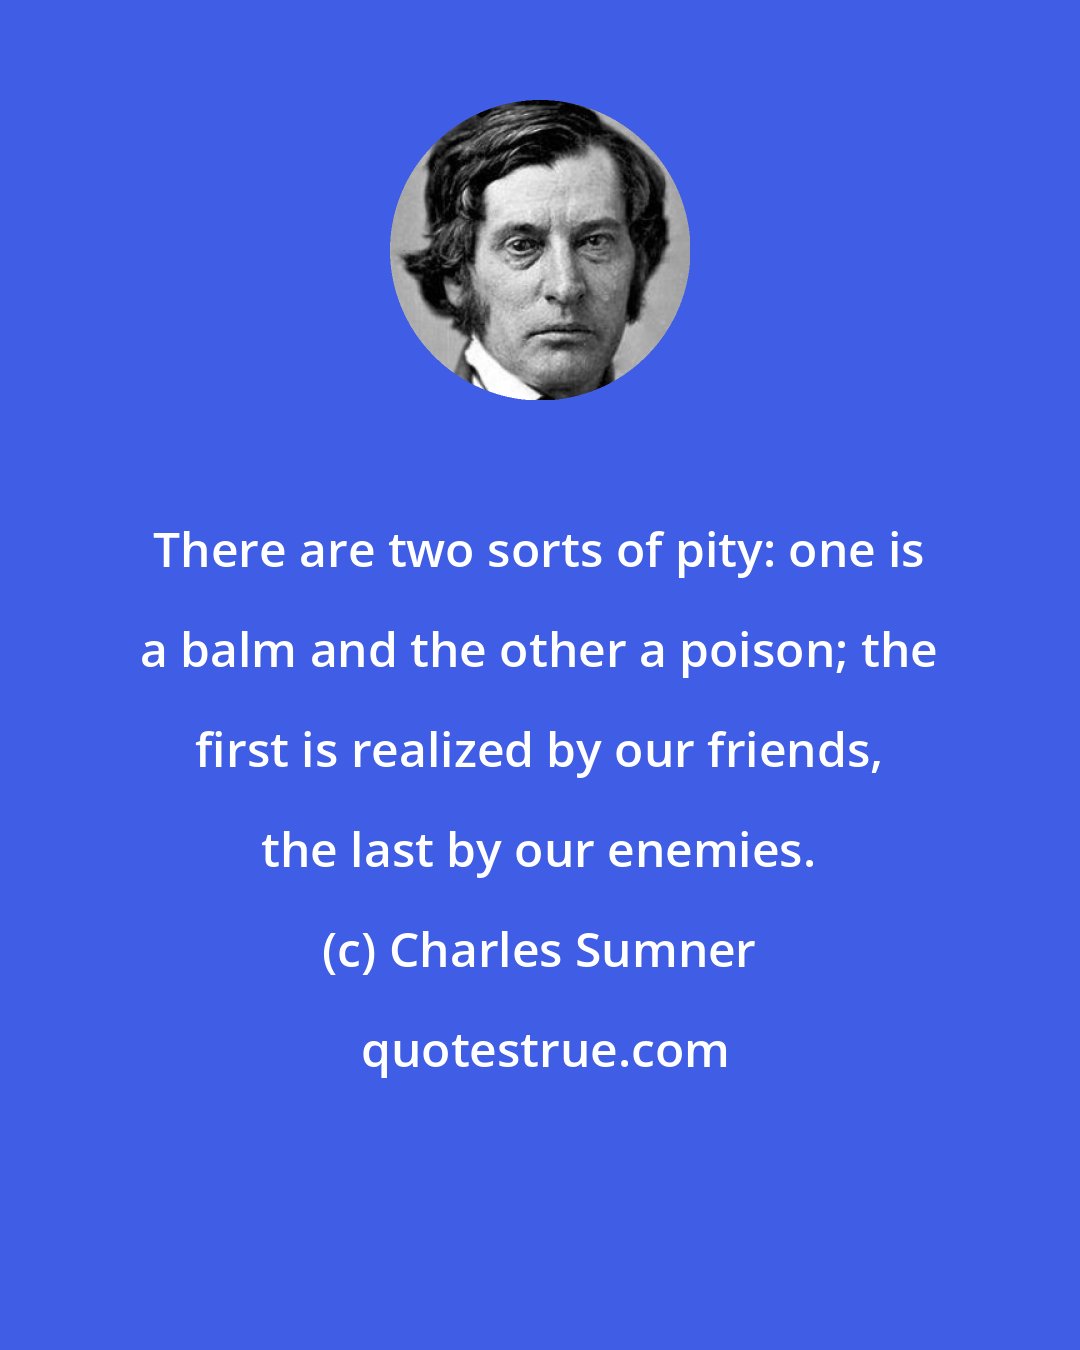 Charles Sumner: There are two sorts of pity: one is a balm and the other a poison; the first is realized by our friends, the last by our enemies.